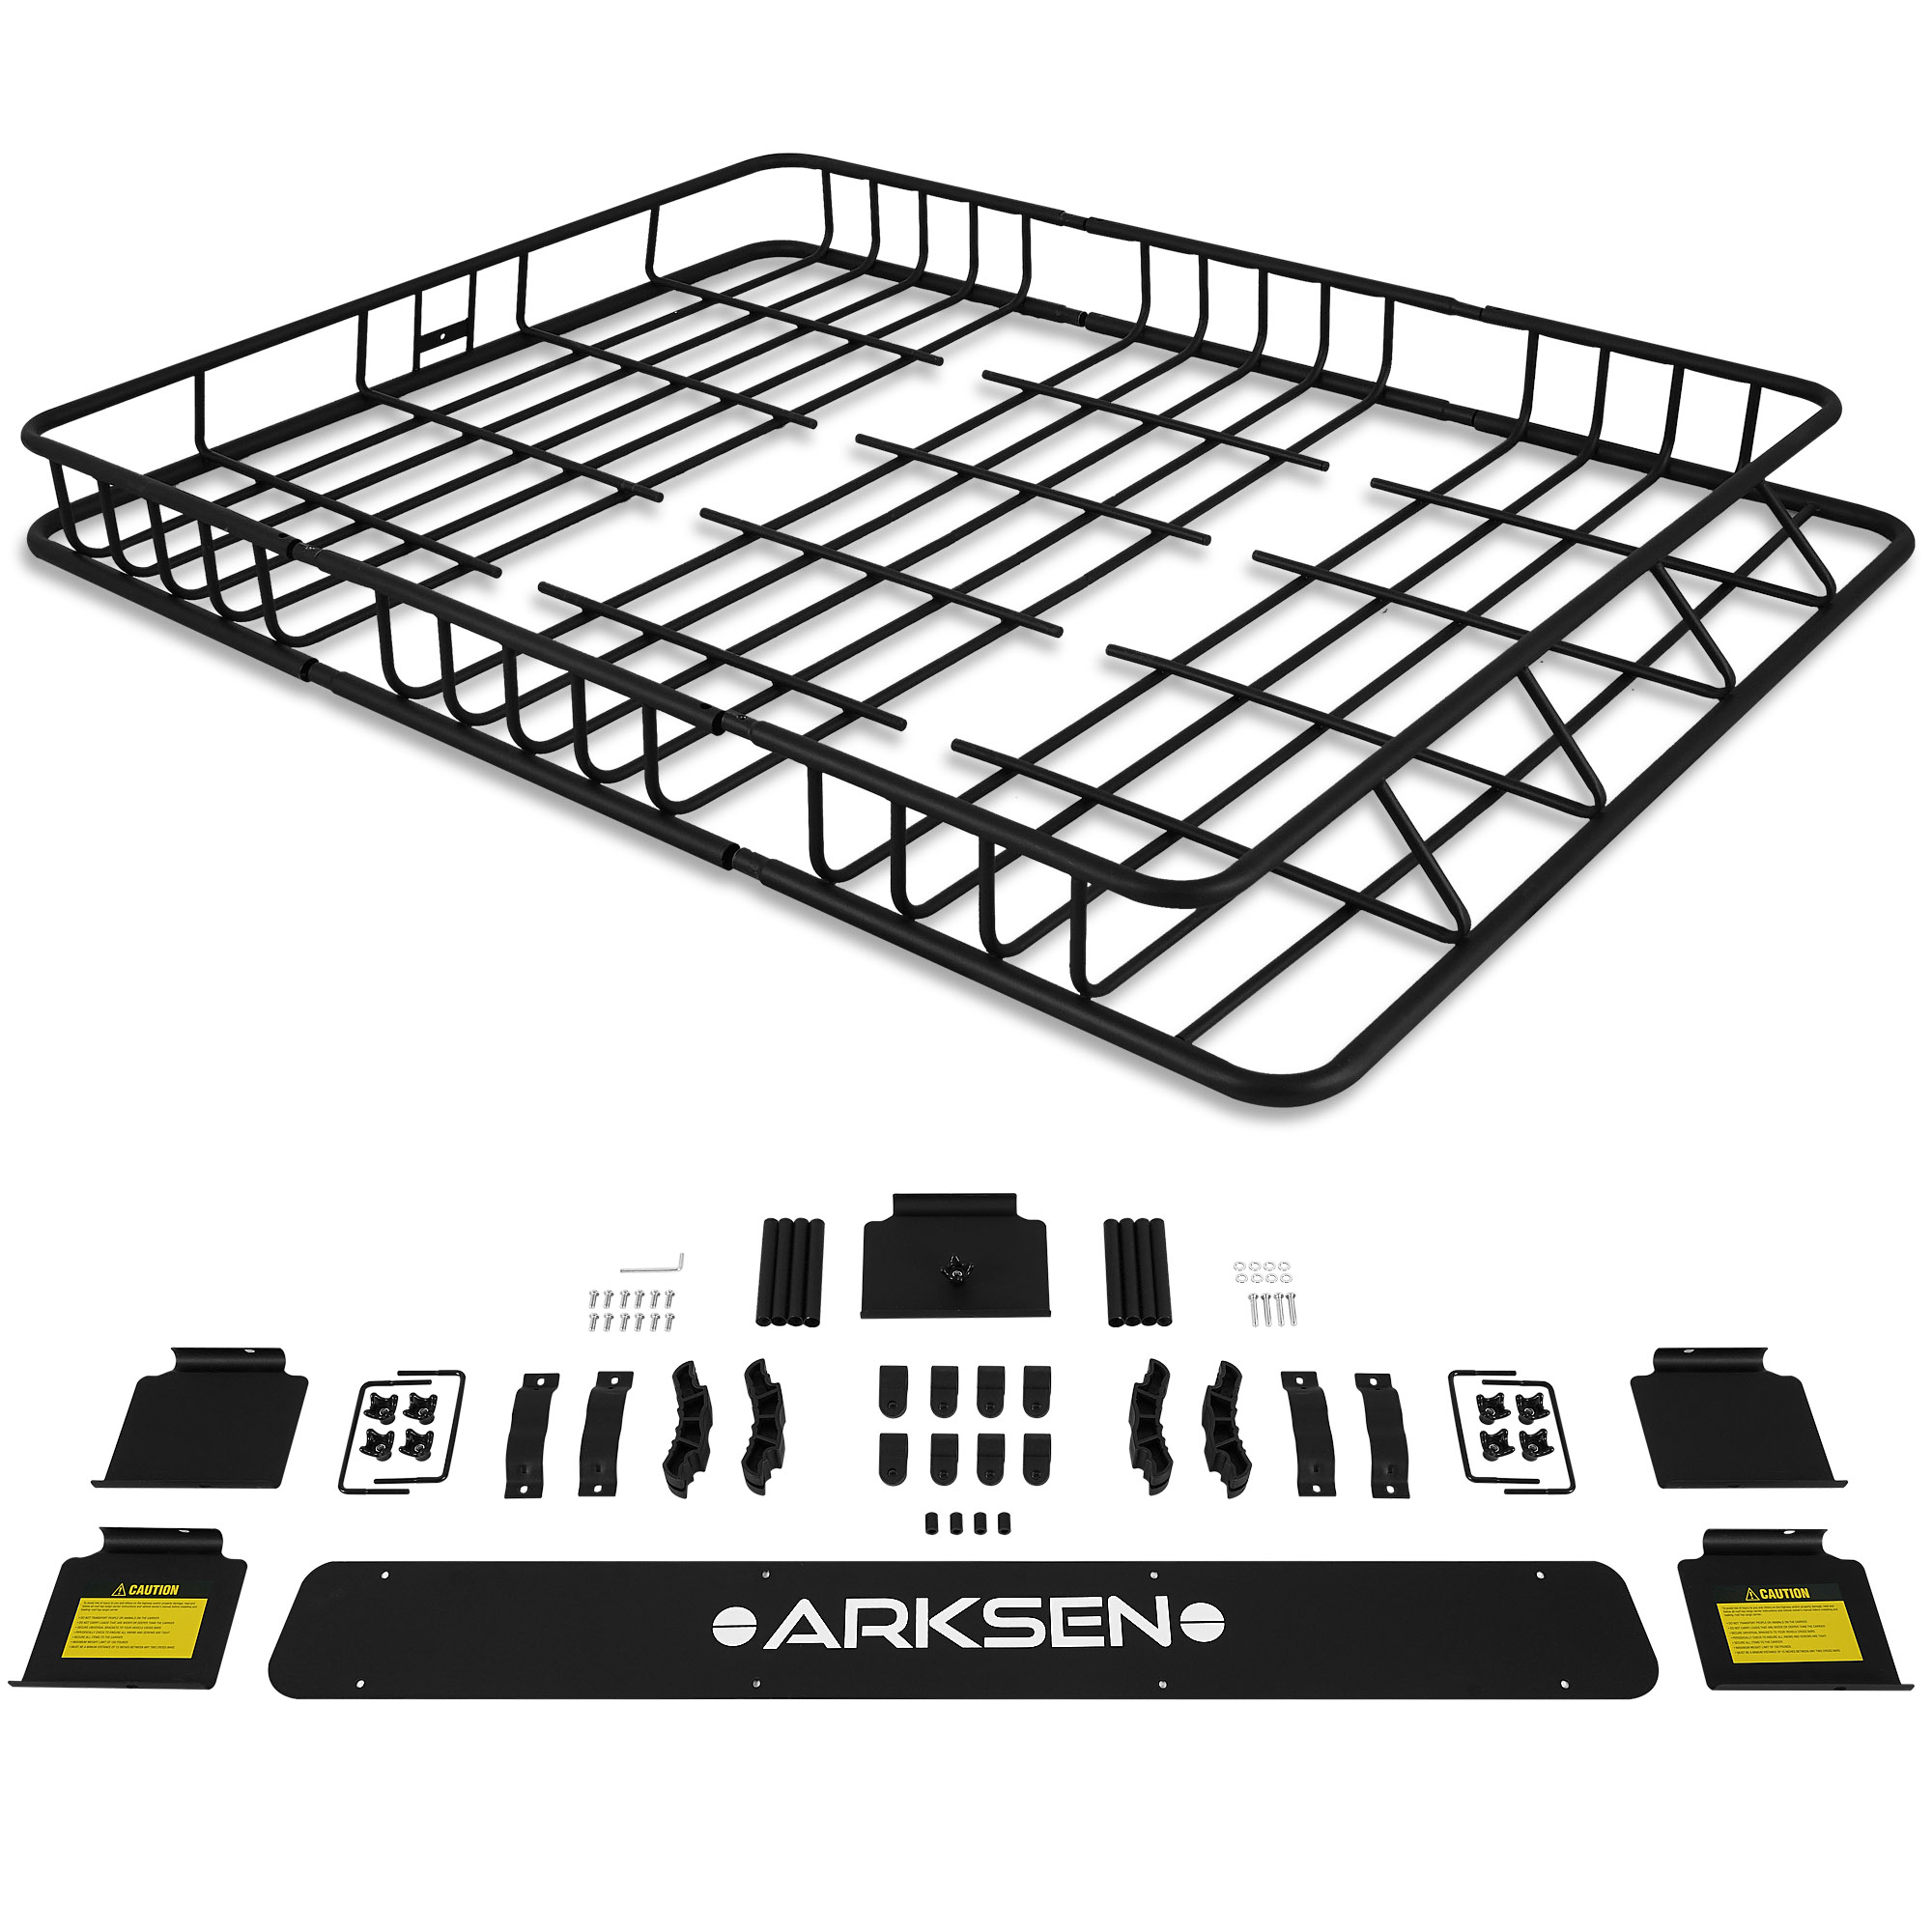 ARKSEN 64" x 50" x 6" Perfect-Wide Roof Rack Cargo Basket 150 lb.  Capacity Full-size SUV Heavy Duty Roof Top Luggage Carrier, Black 